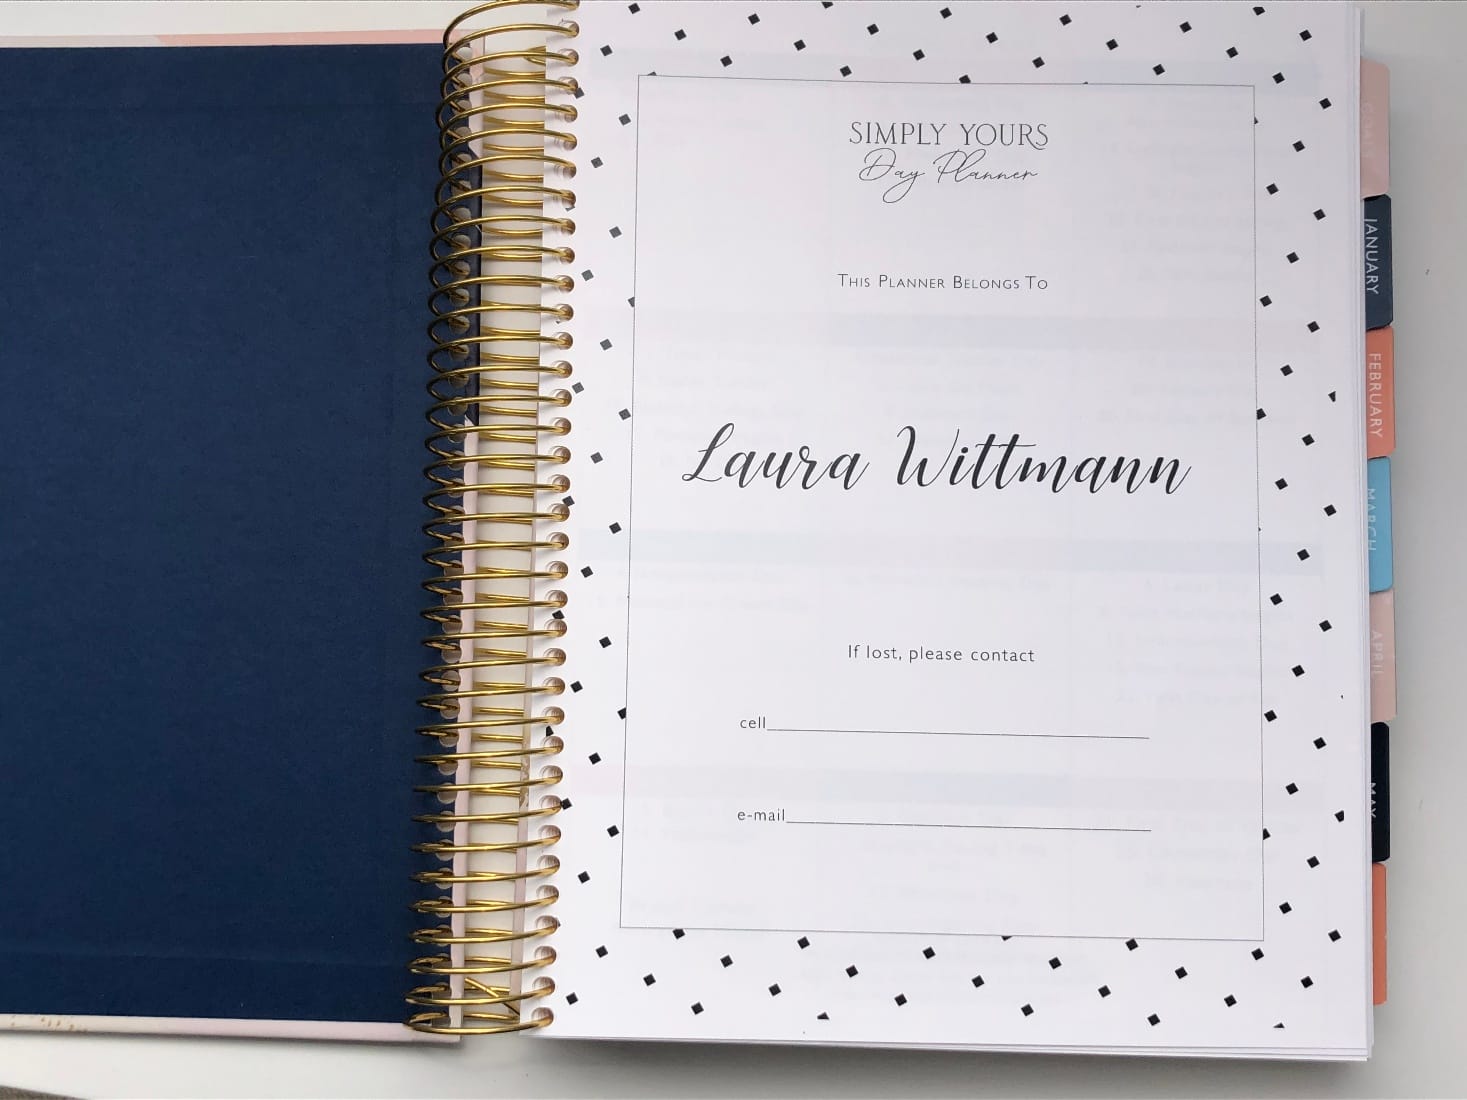 Simply Yours Day Planner Personalized